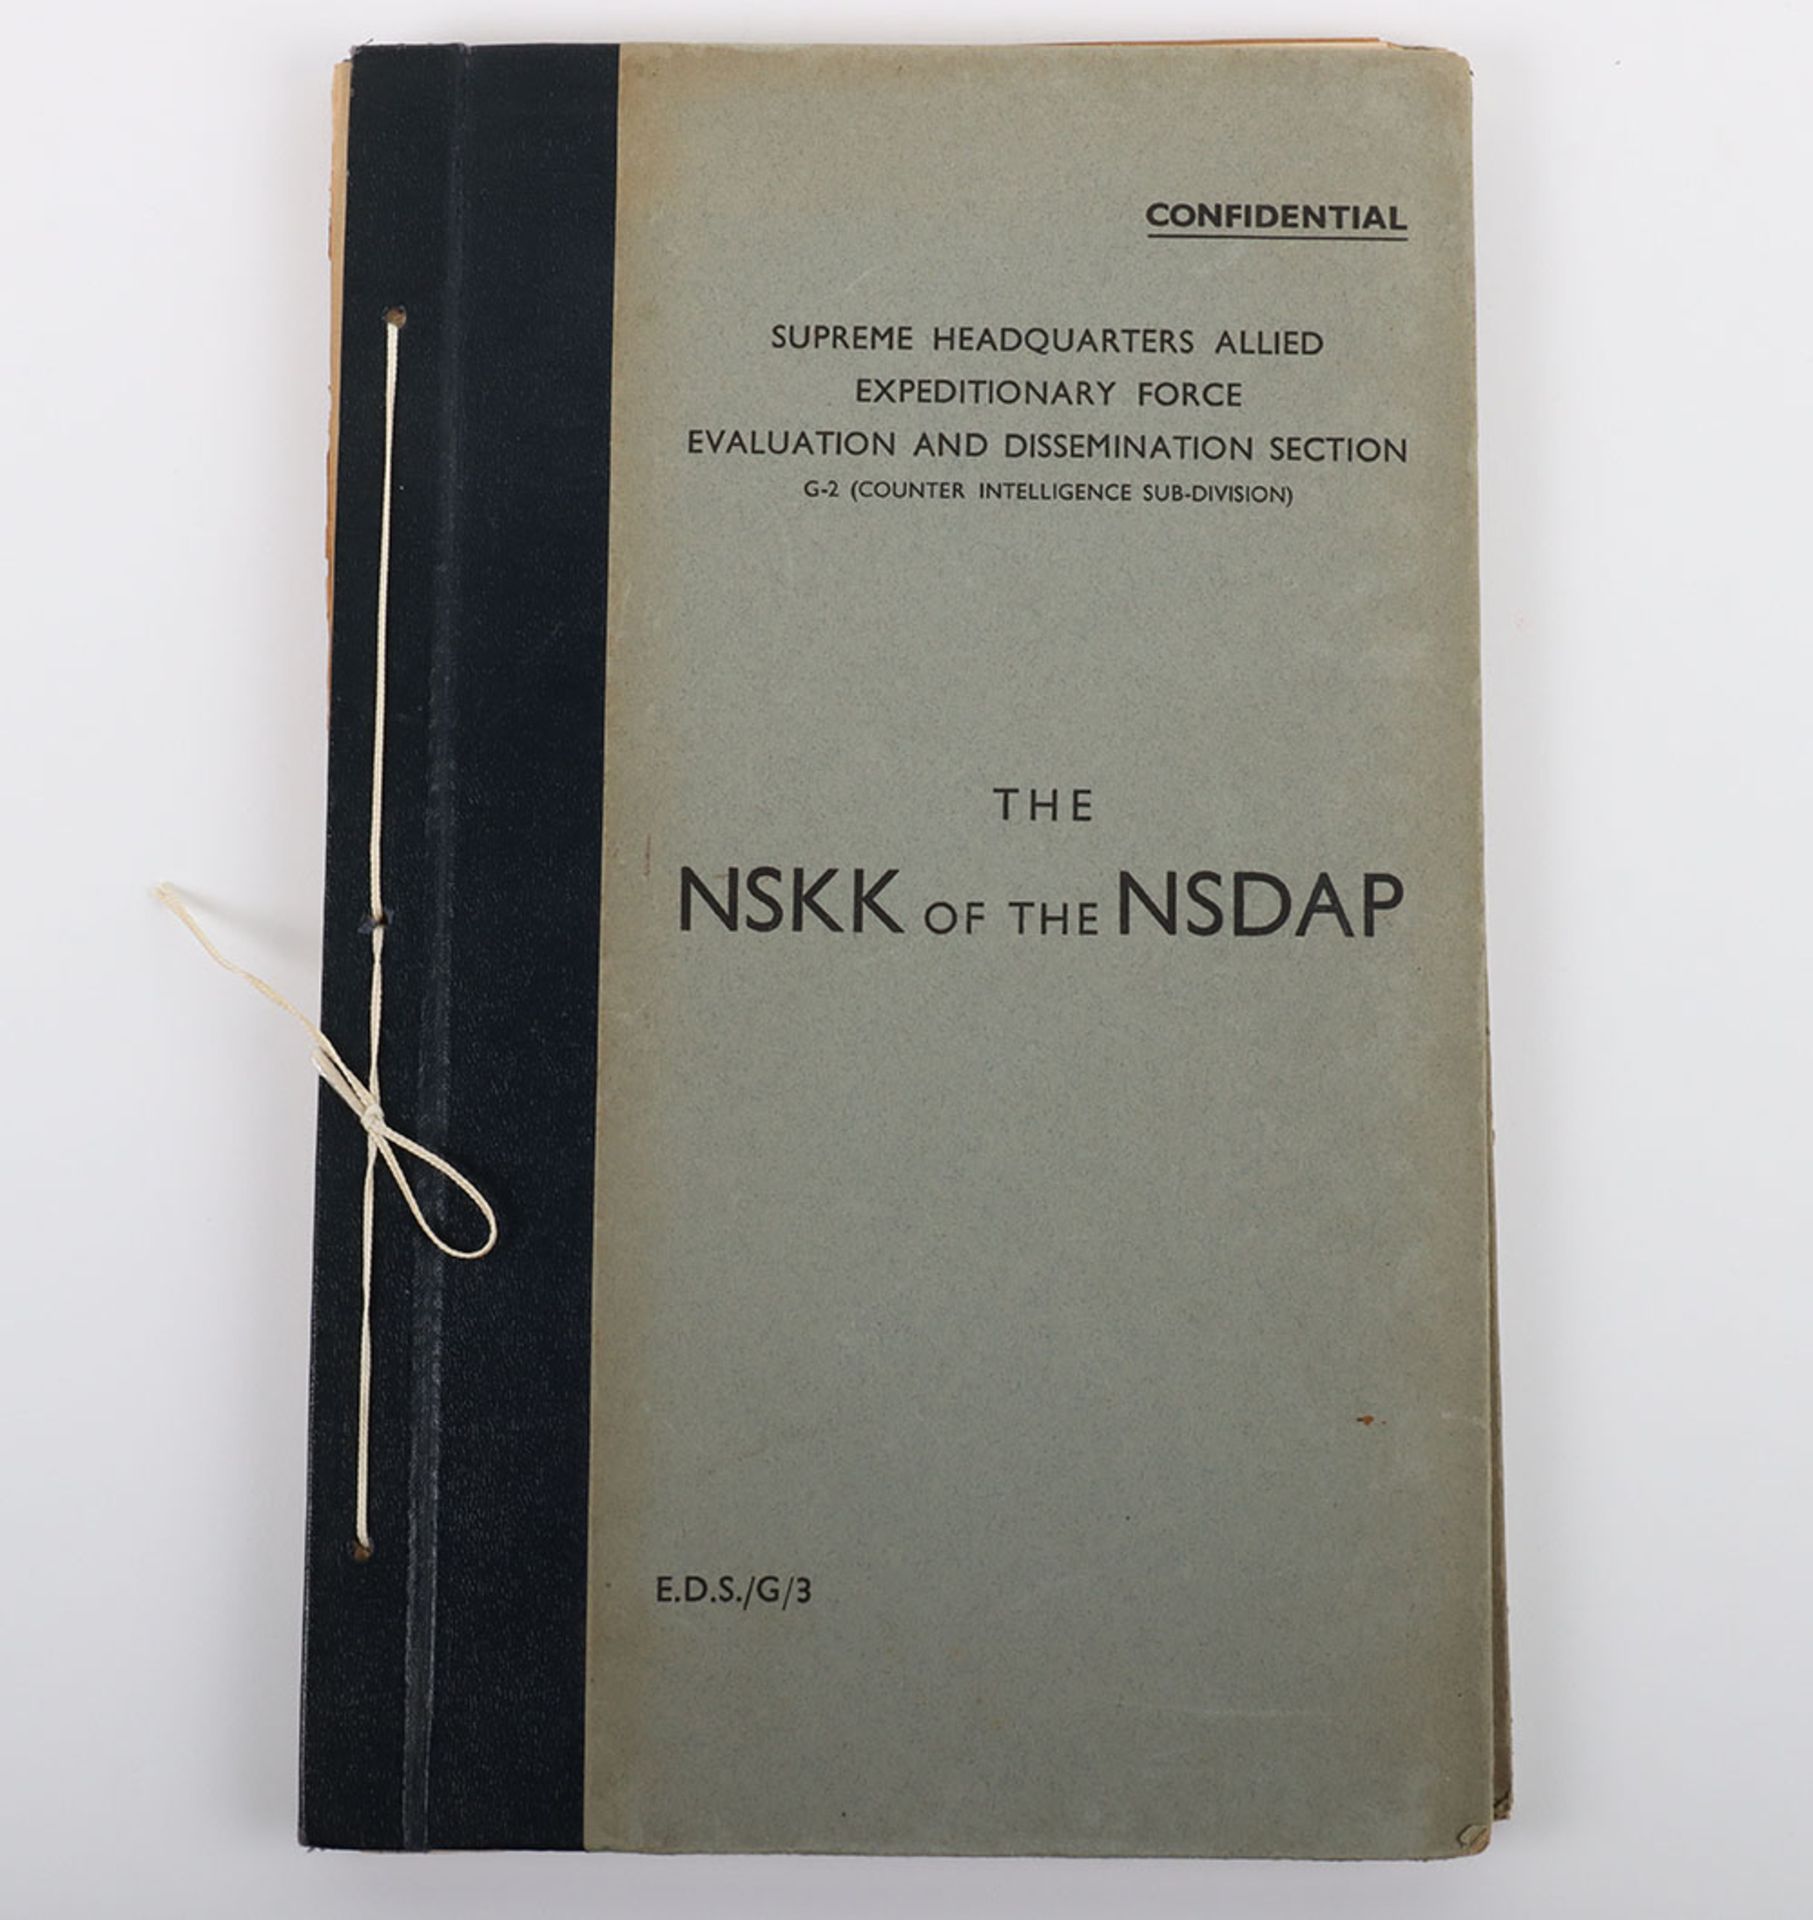 The NSKK of the NSDAP (Supreme Headquarters Allied Expeditionary Force